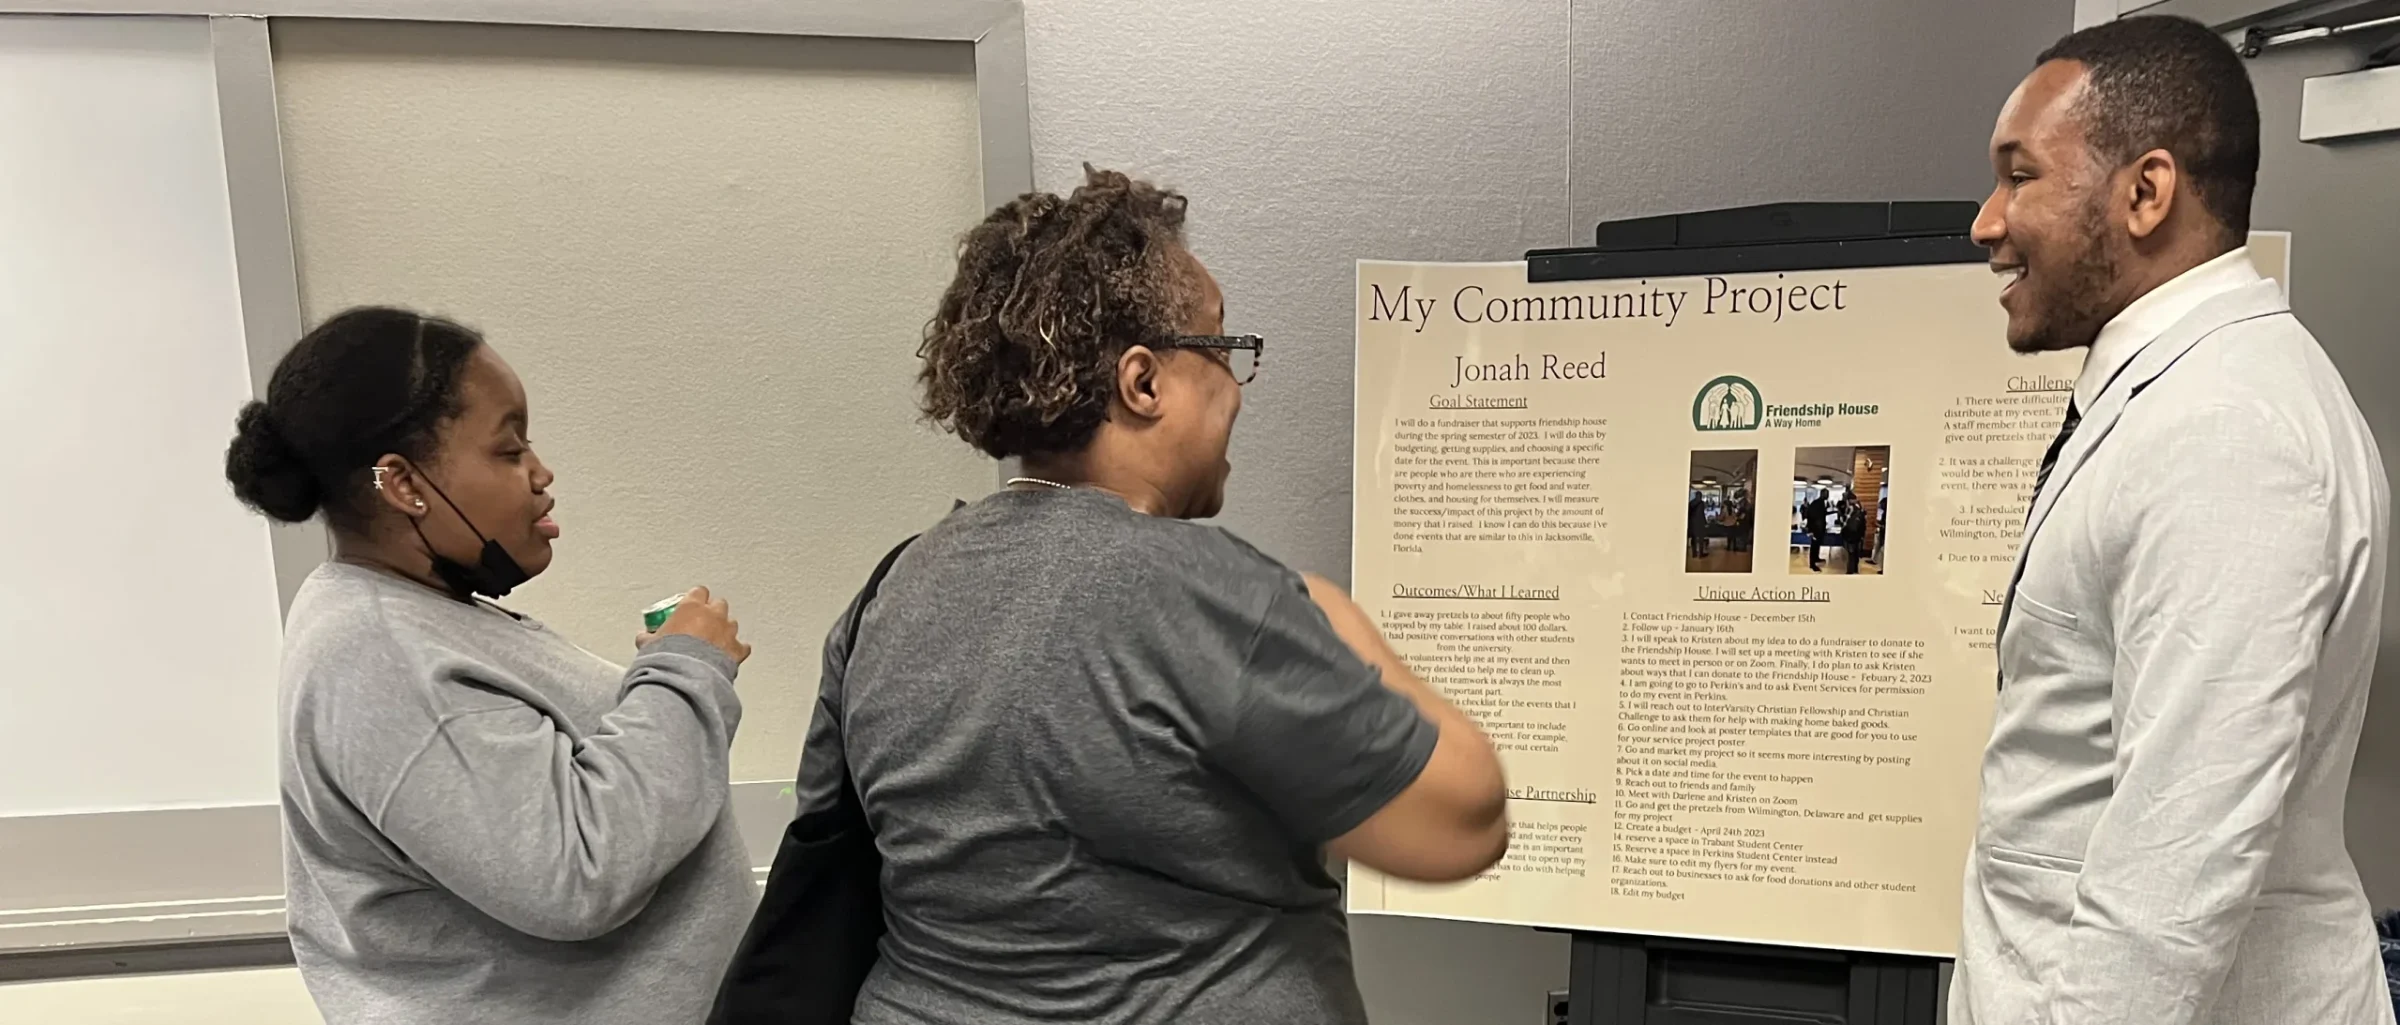 A student presents their community project poster to two visitors